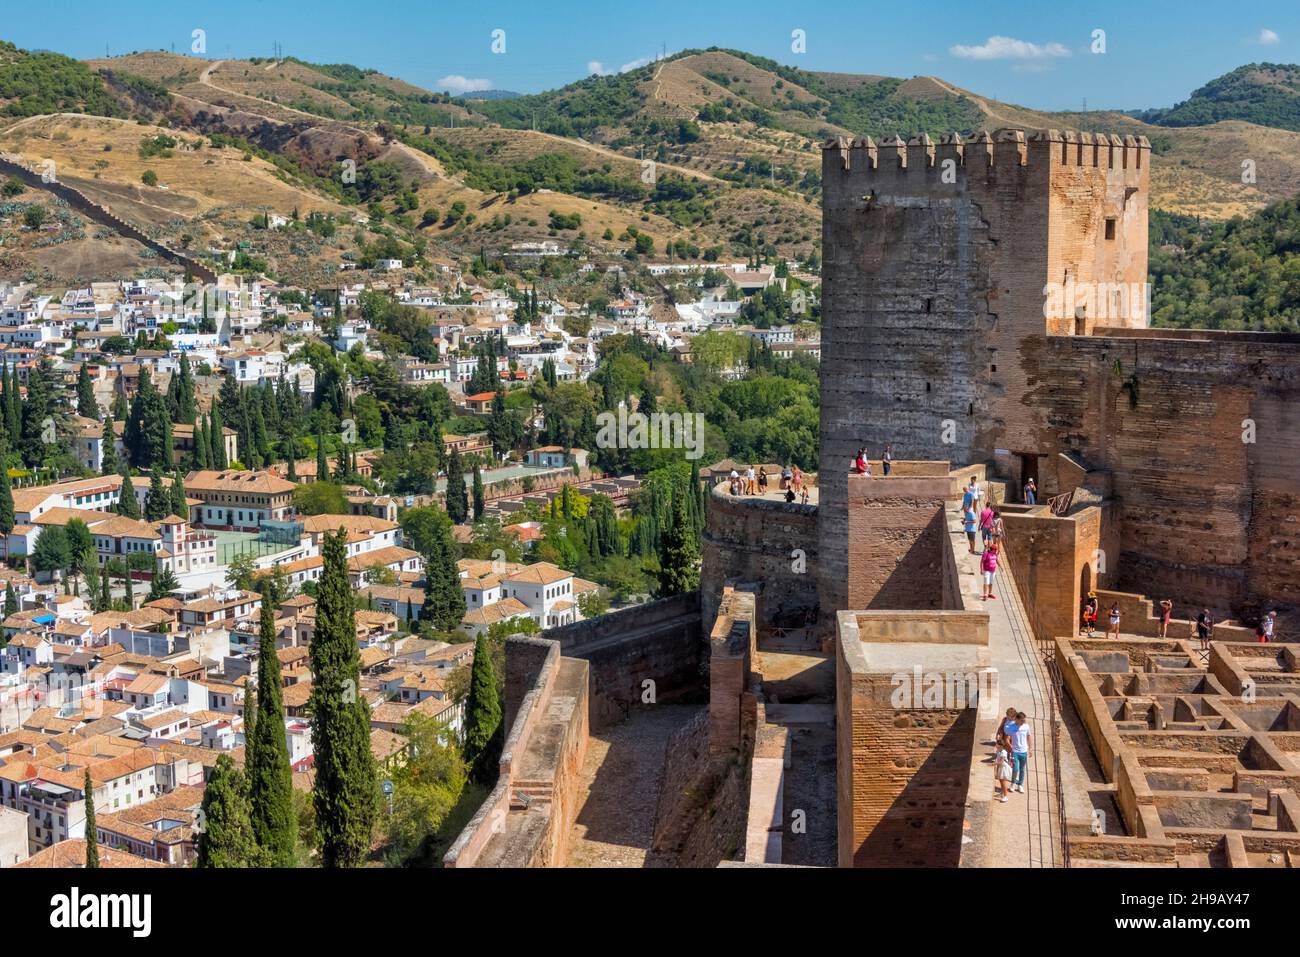 The Alcazaba, fortress towers and outer walls of Alhambra, overlooking Granada cityscape, Granada Province, Andalusia Autonomous Community, Spain Stock Photo